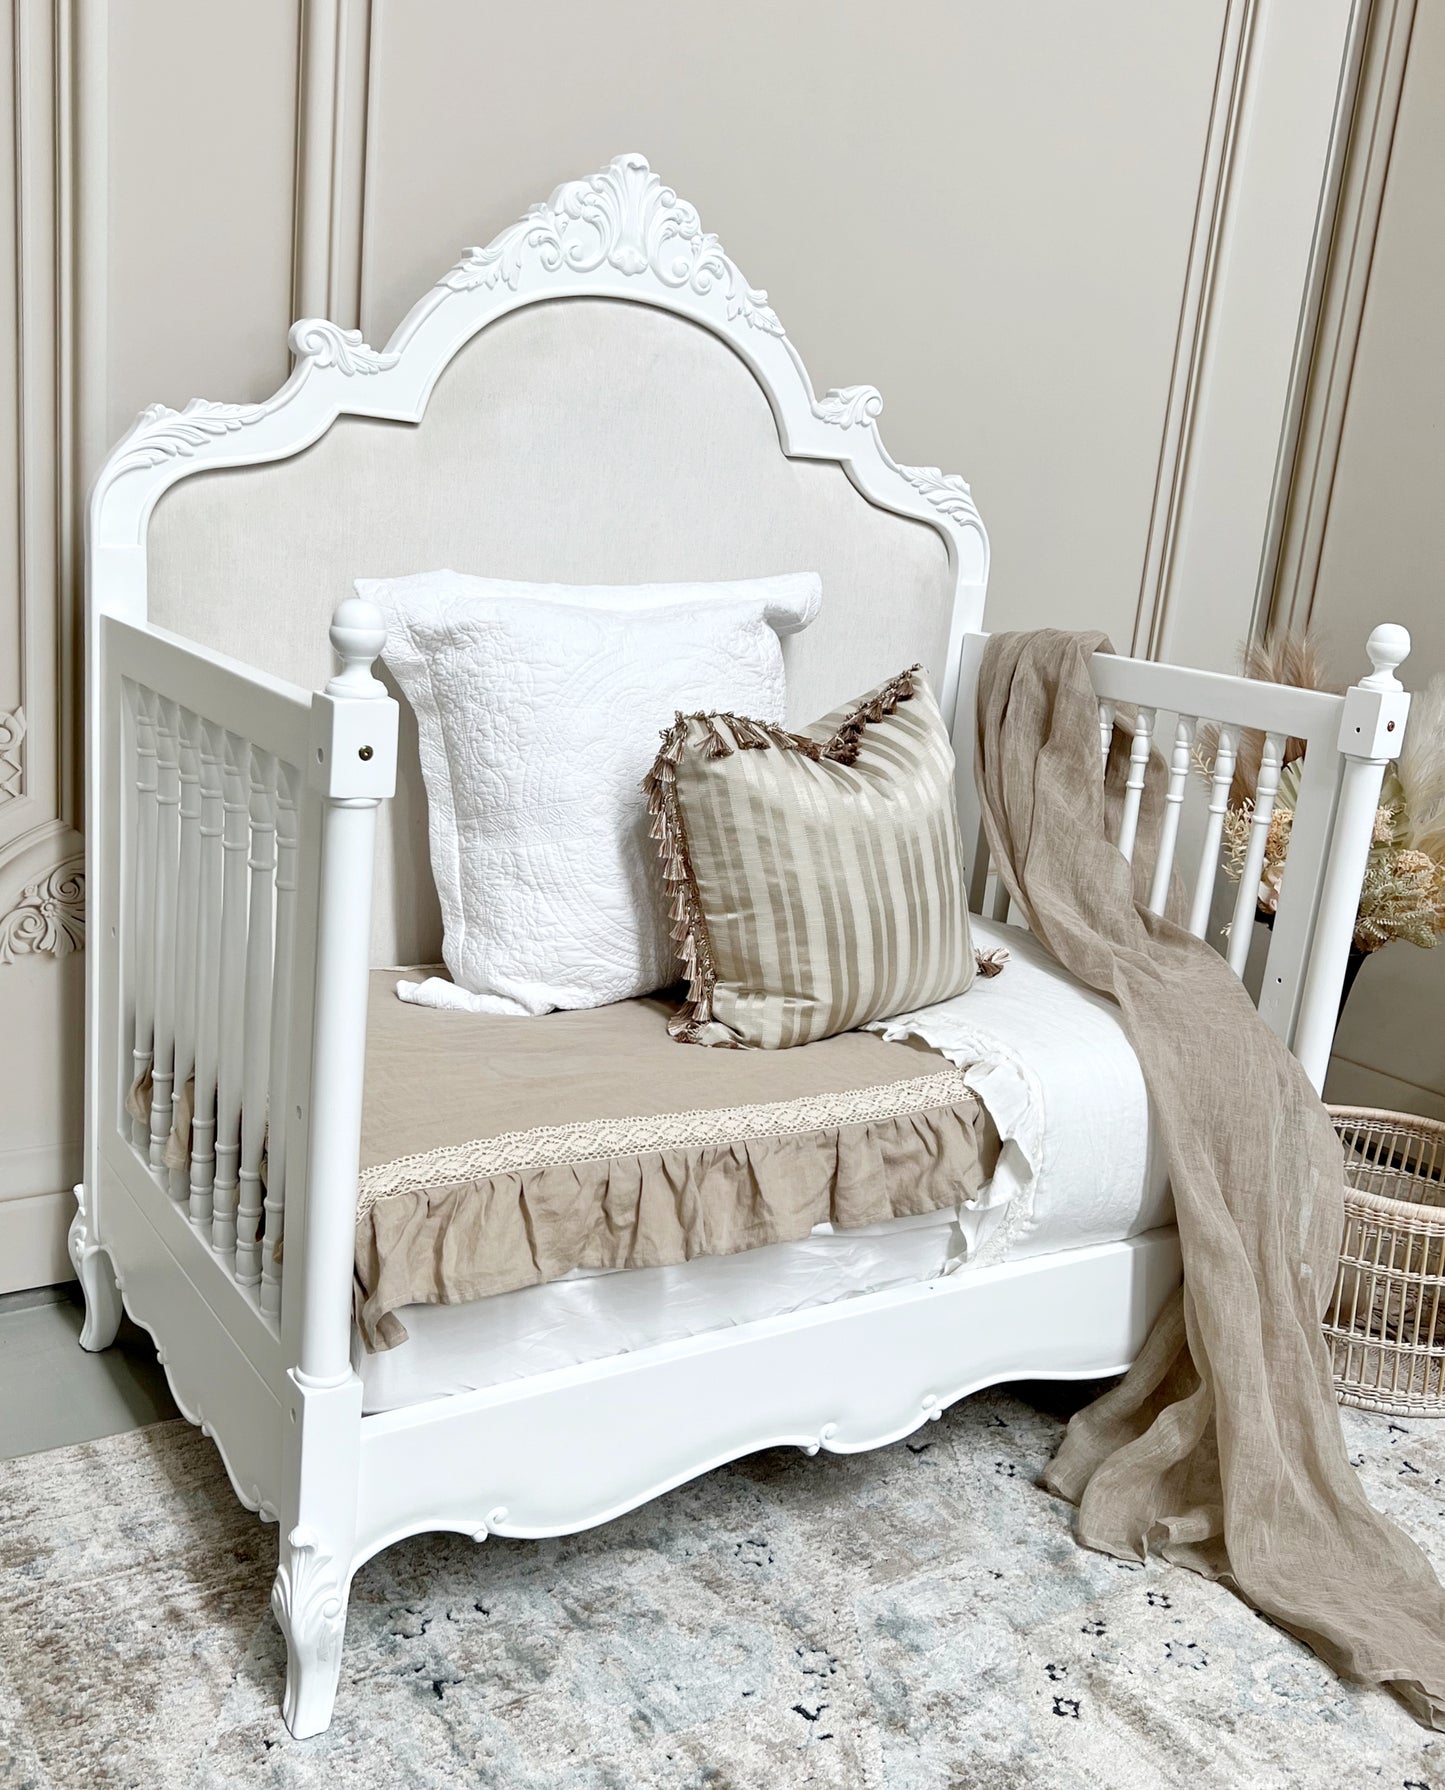 Ophelia Upholstered Cot